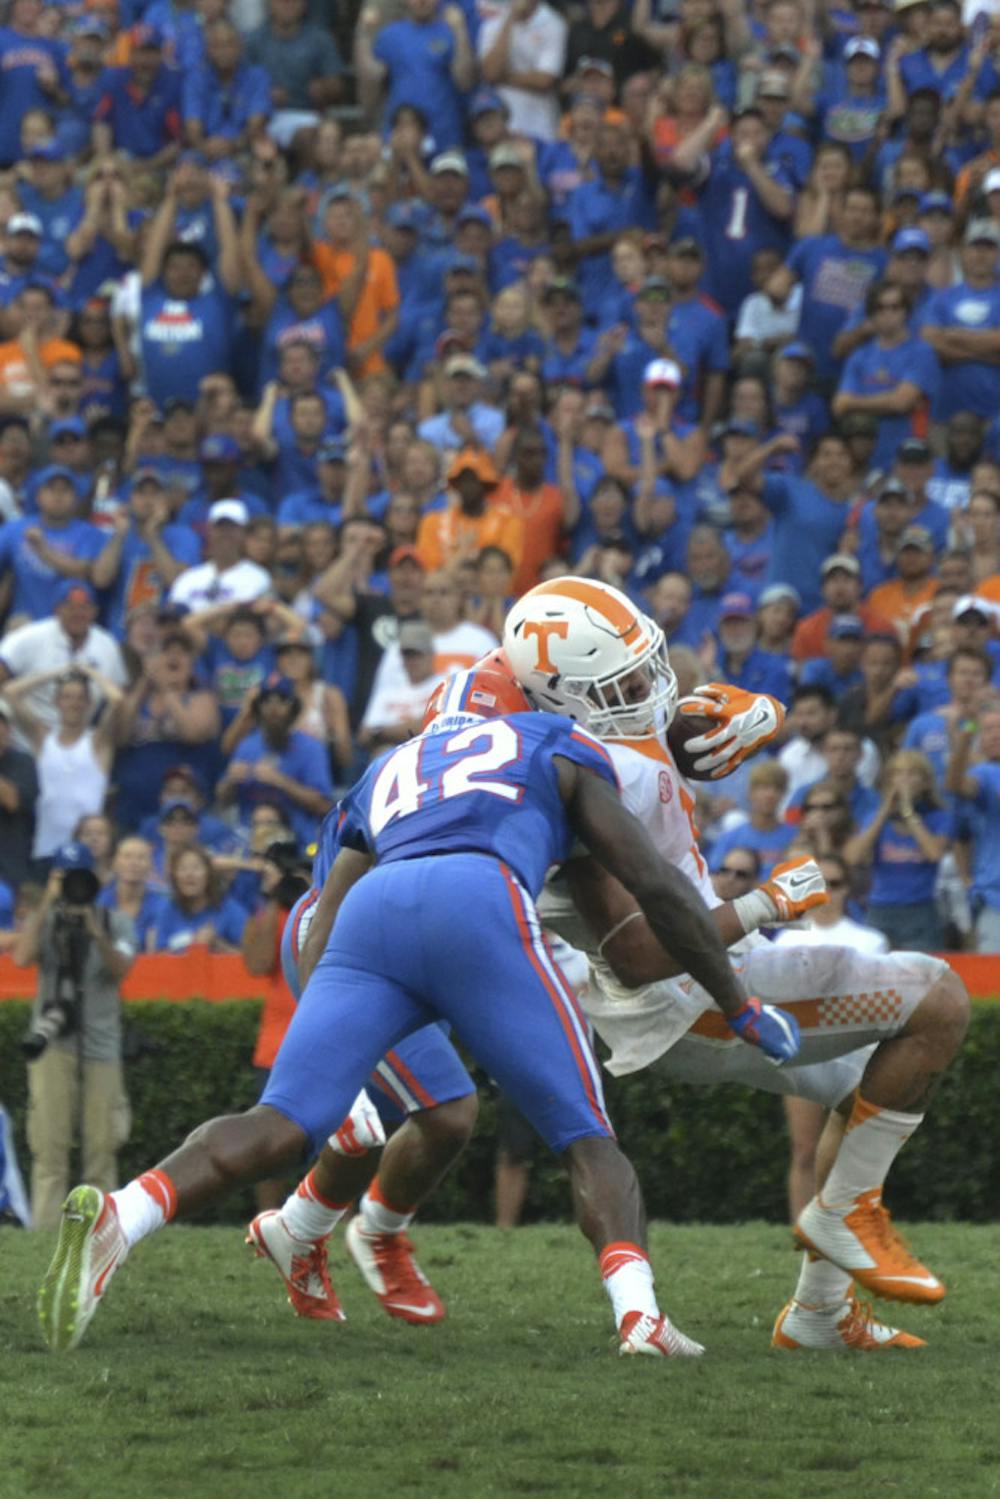 <p>UF safety Keanu Neal makes a tackle during Florida's 28-27 win against Tennessee on Sept. 26, 2015, at Ben Hill Griffin Stadium.</p>